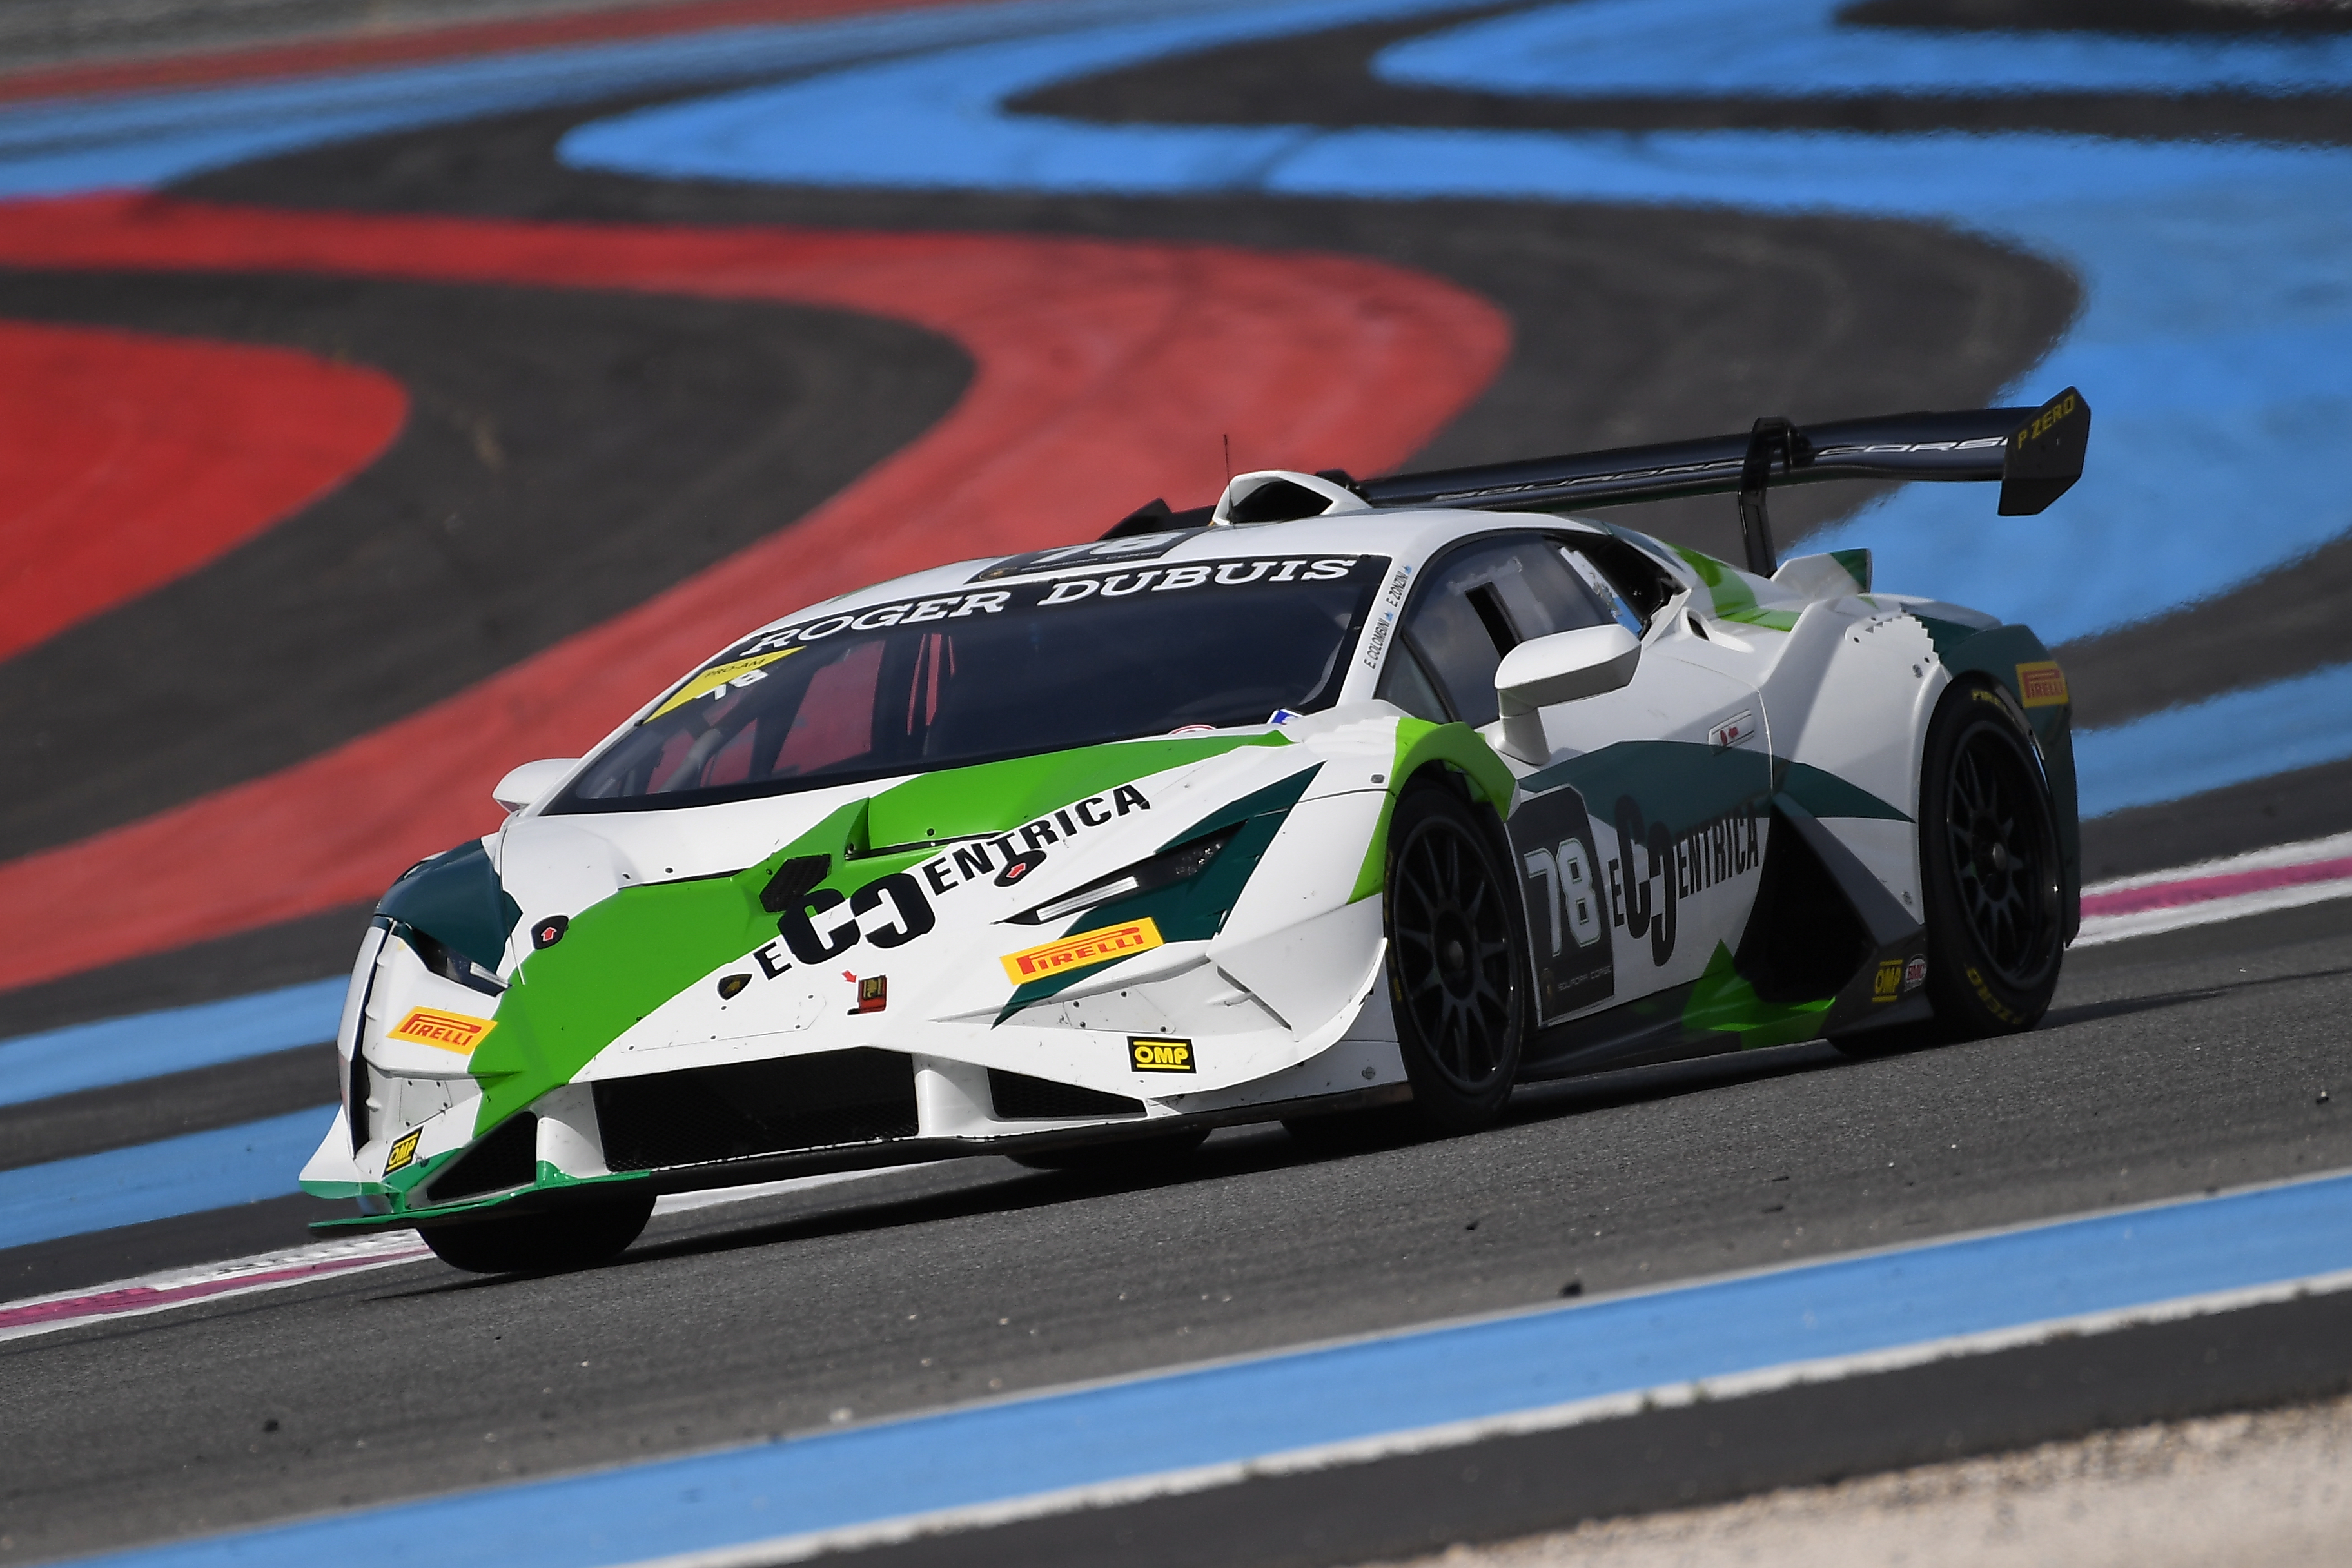 DOUBLE POINTS FINISH FOR BOTH VSR CARS AT PAUL RICARD